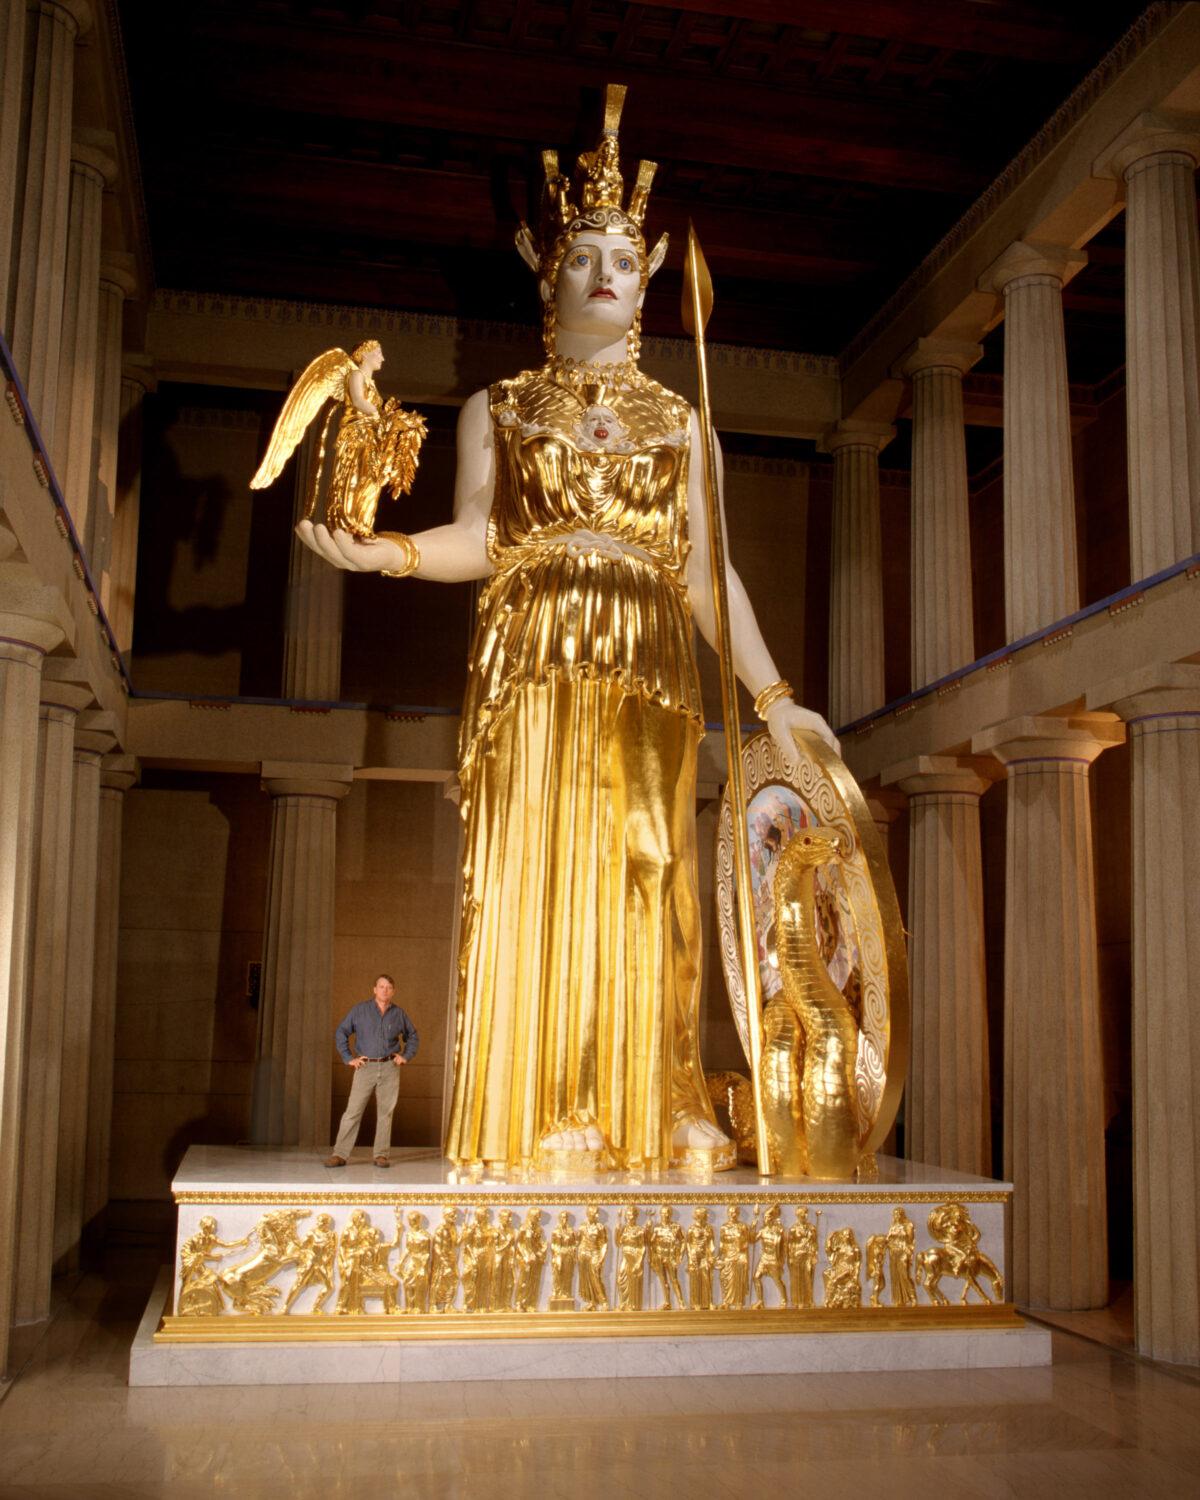  Athena Parthenos by Alan LeQuire (1990) recreates the lost statue by Phidias, with modern materials. It's housed in a full-scale replica of the Parthenon in Nashville’s Centennial Park. (Dean Dixon/Free Art License)